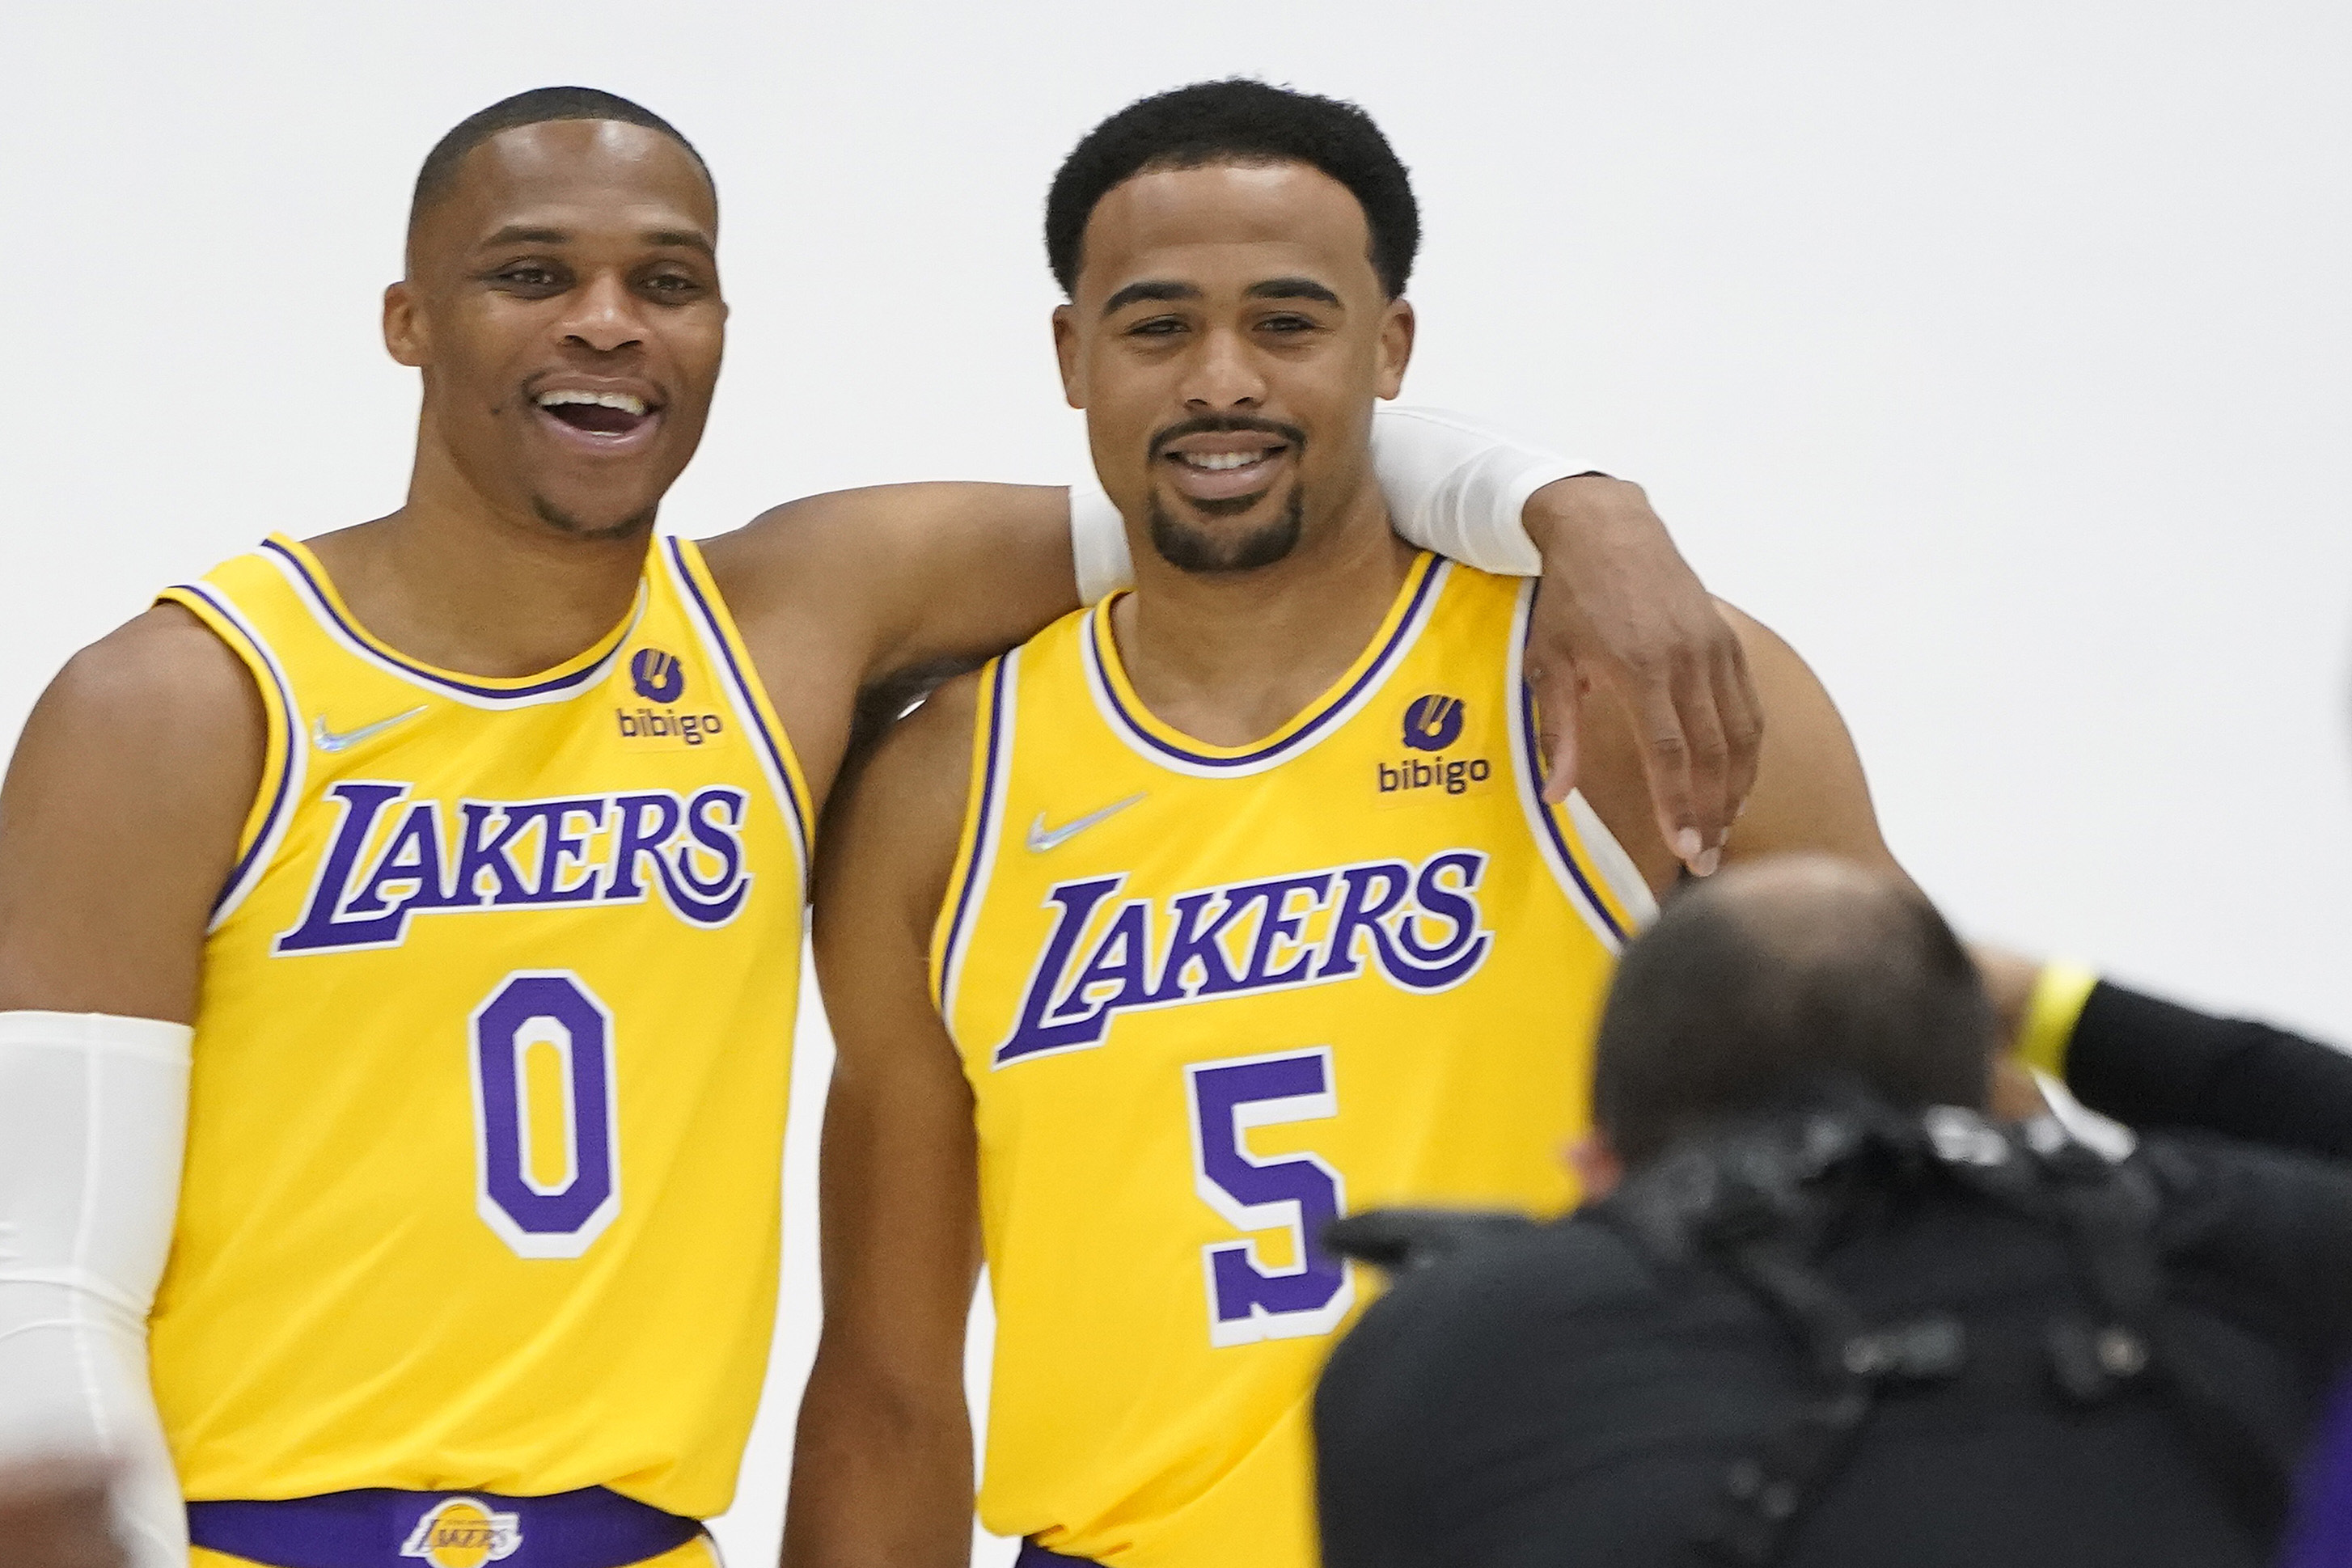 Lakers' new jersey patch deal with Bibigo worth double the NBA average -  Silver Screen and Roll